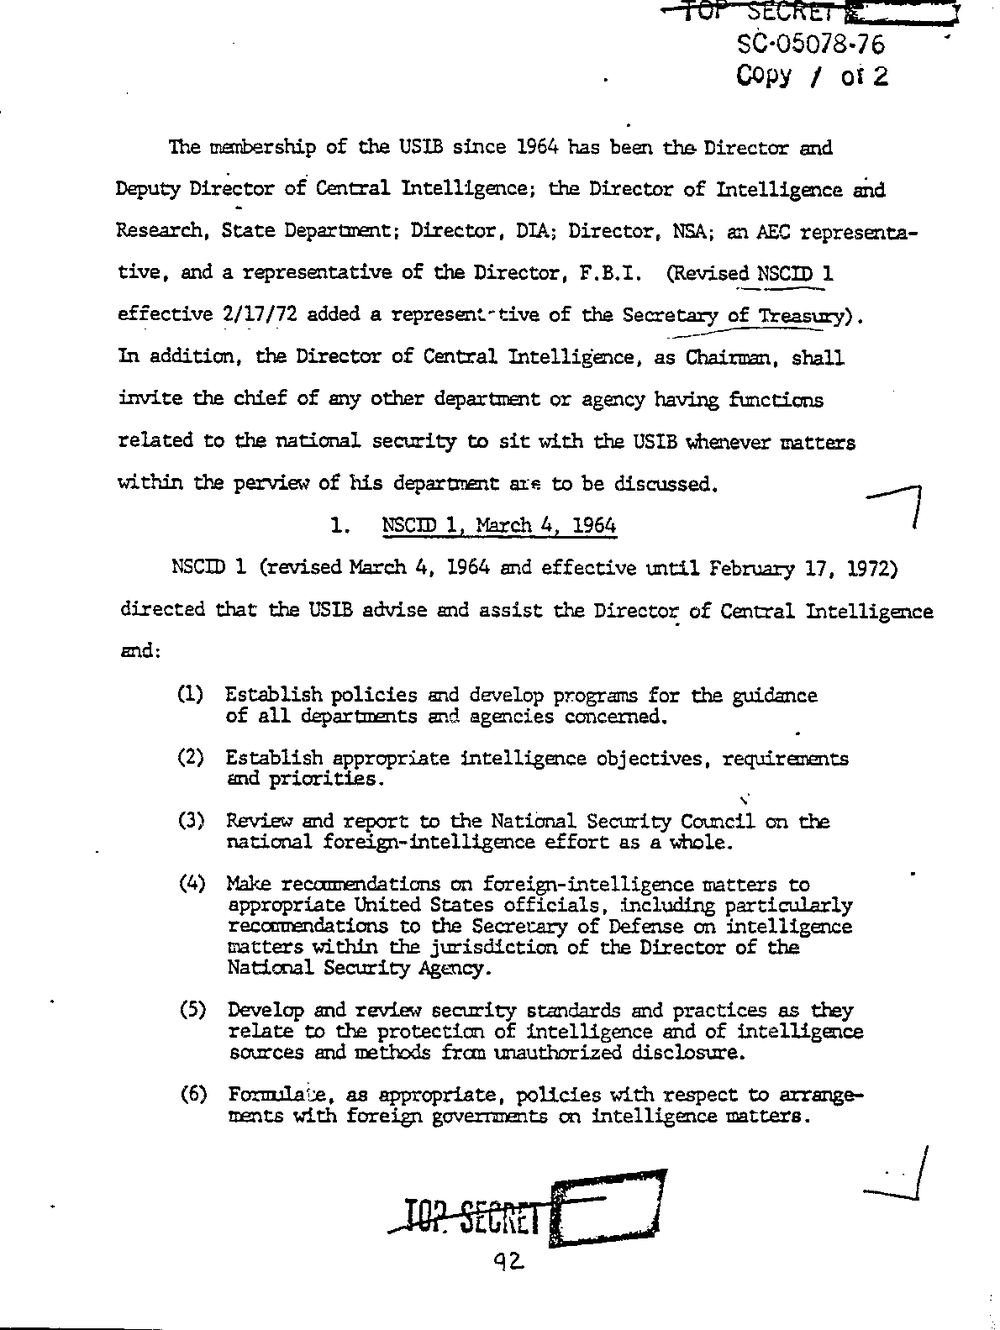 Page 100 from Report on Inquiry Into CIA Related Electronic Surveillance Activities